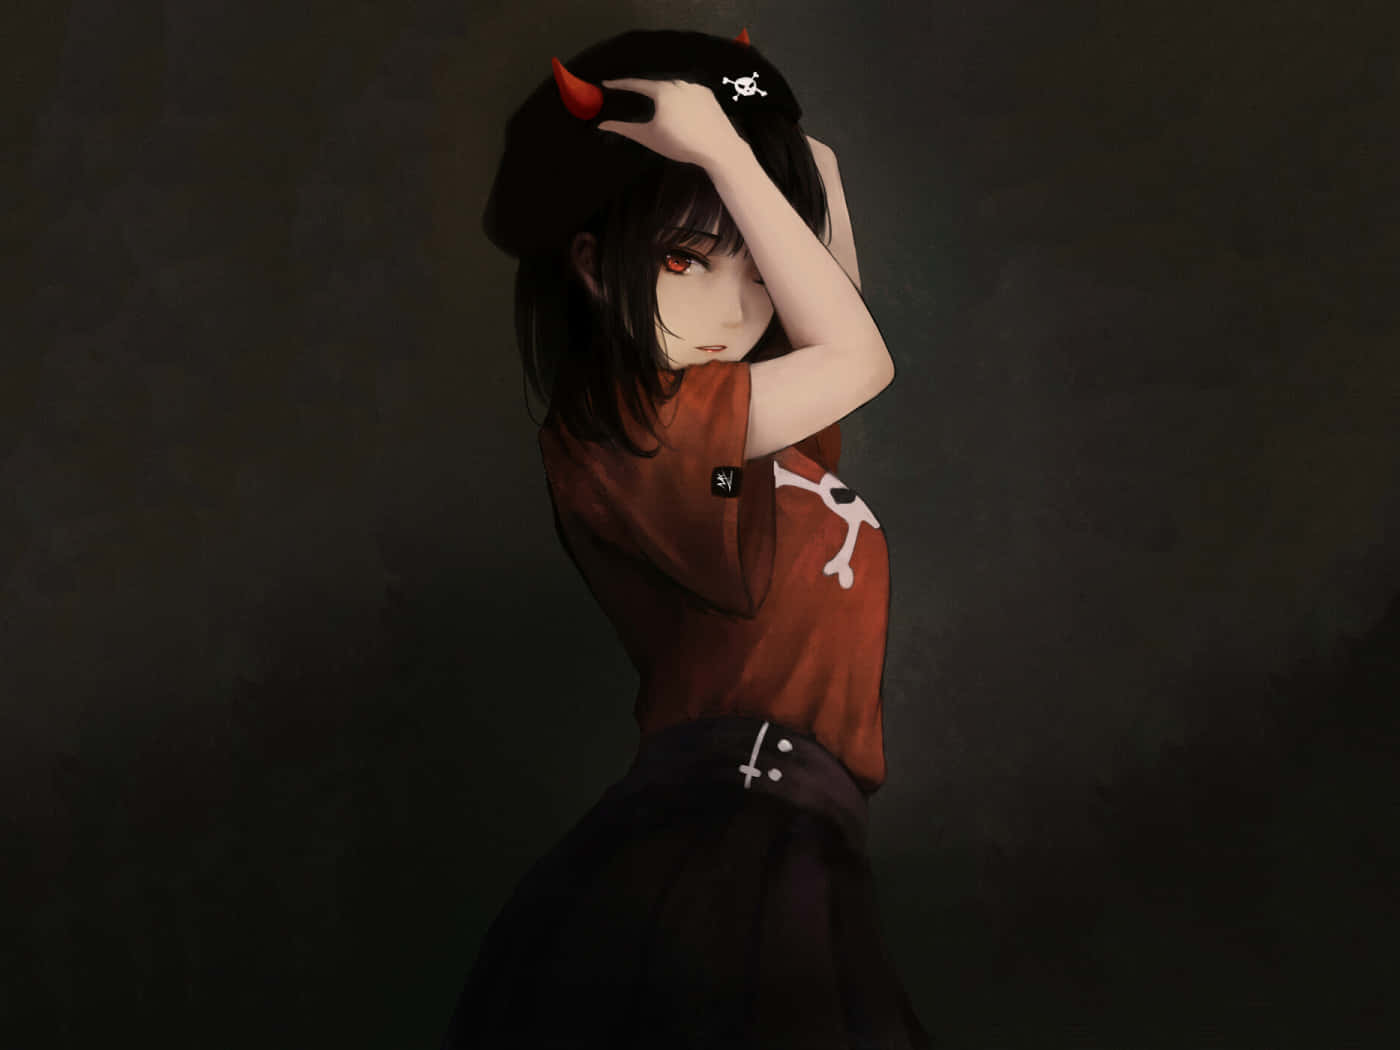 A Girl In A Red Shirt With Horns On Her Head Wallpaper